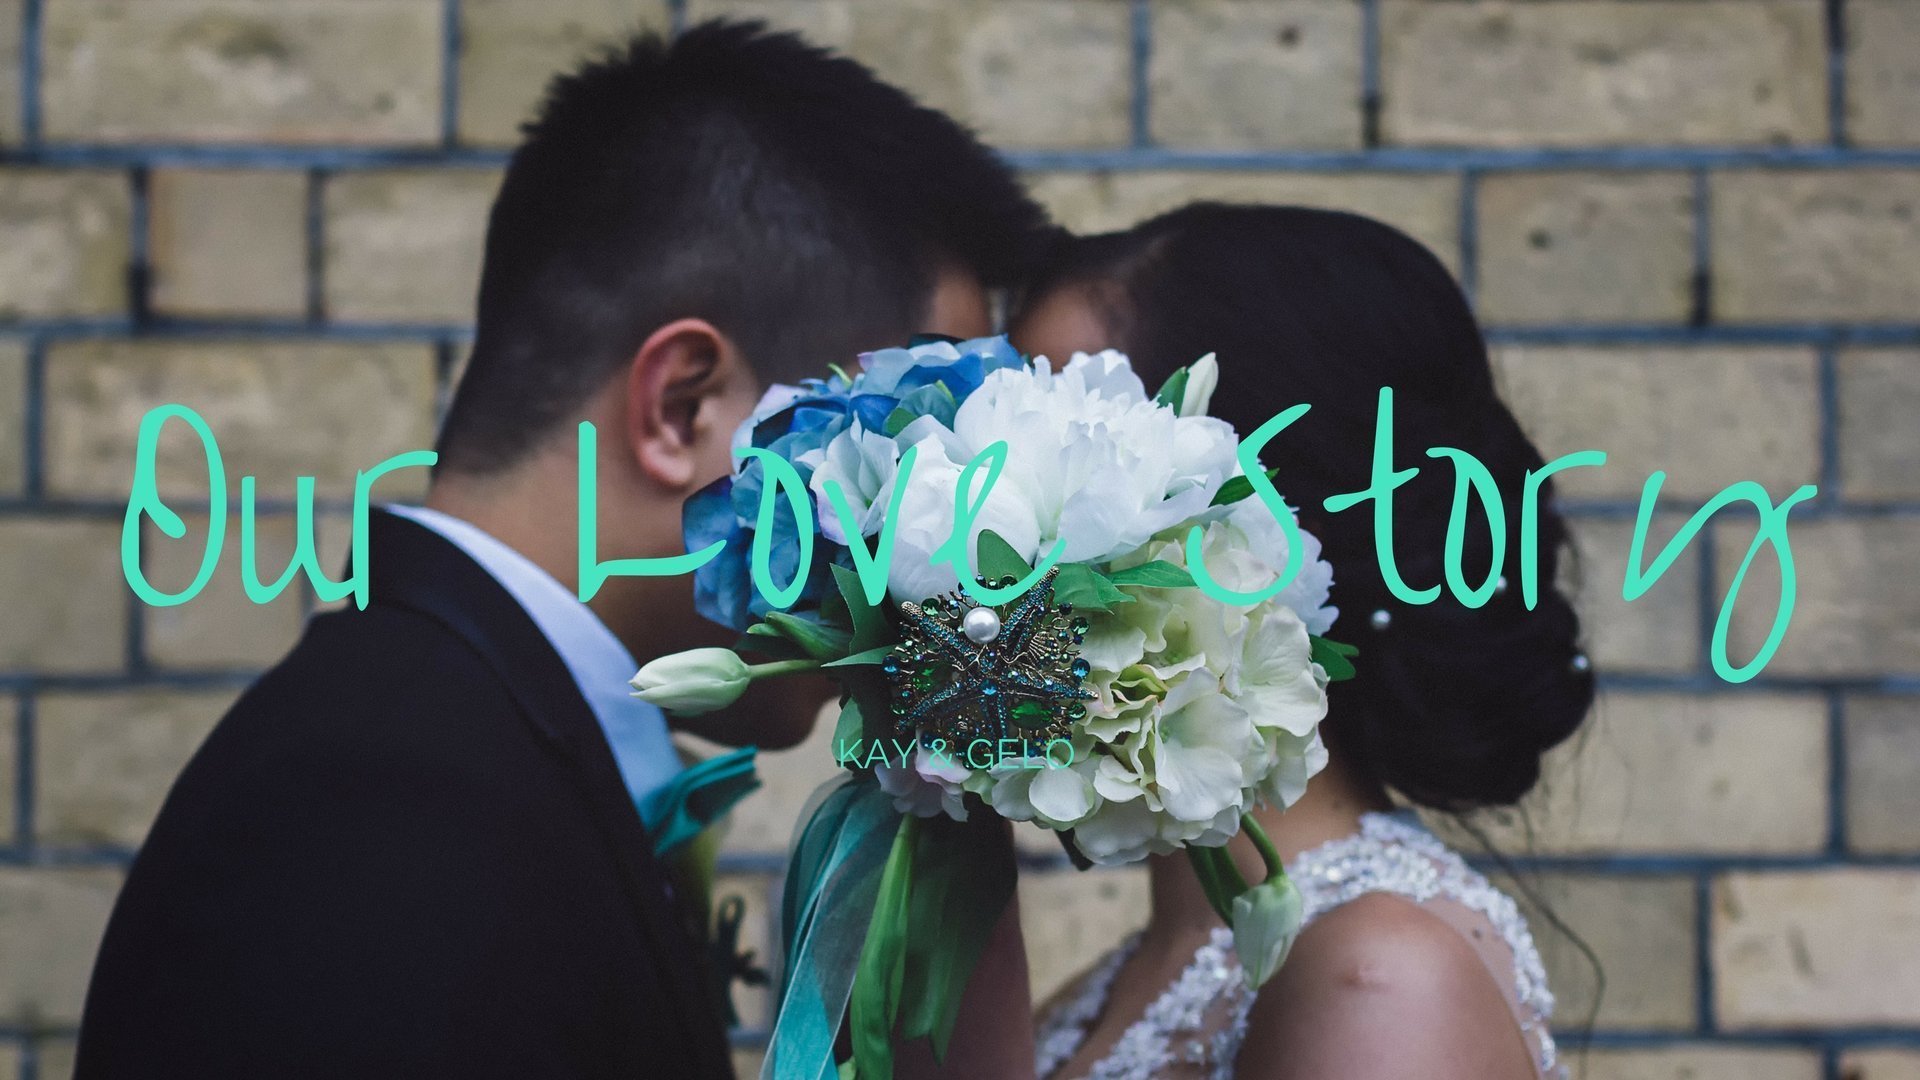 Our Love Story | A Wedding Competition Entry